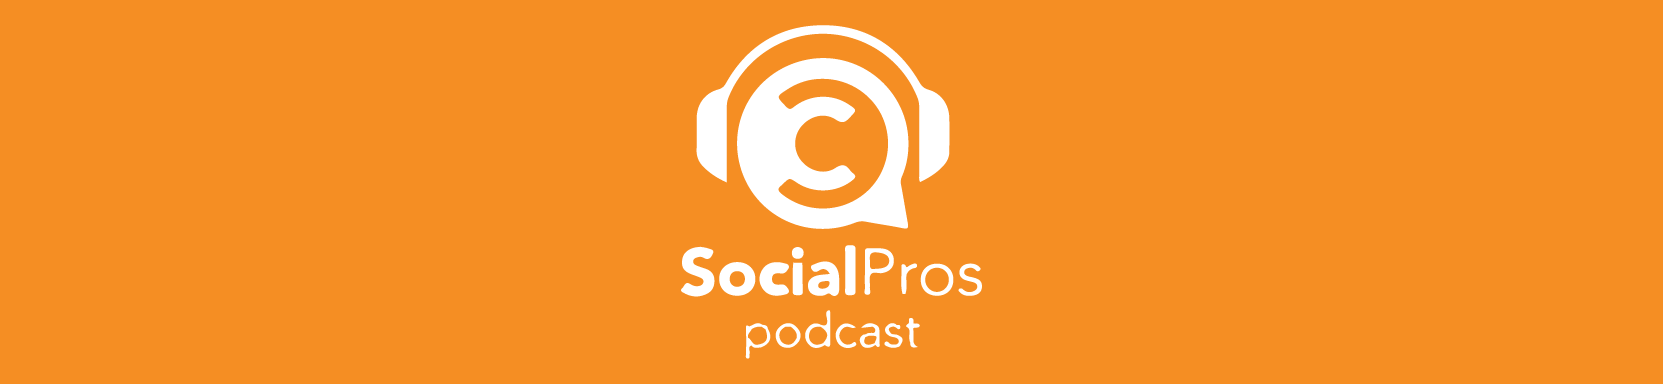 Social Pros Social media marketing Podcast by Convice and Convert